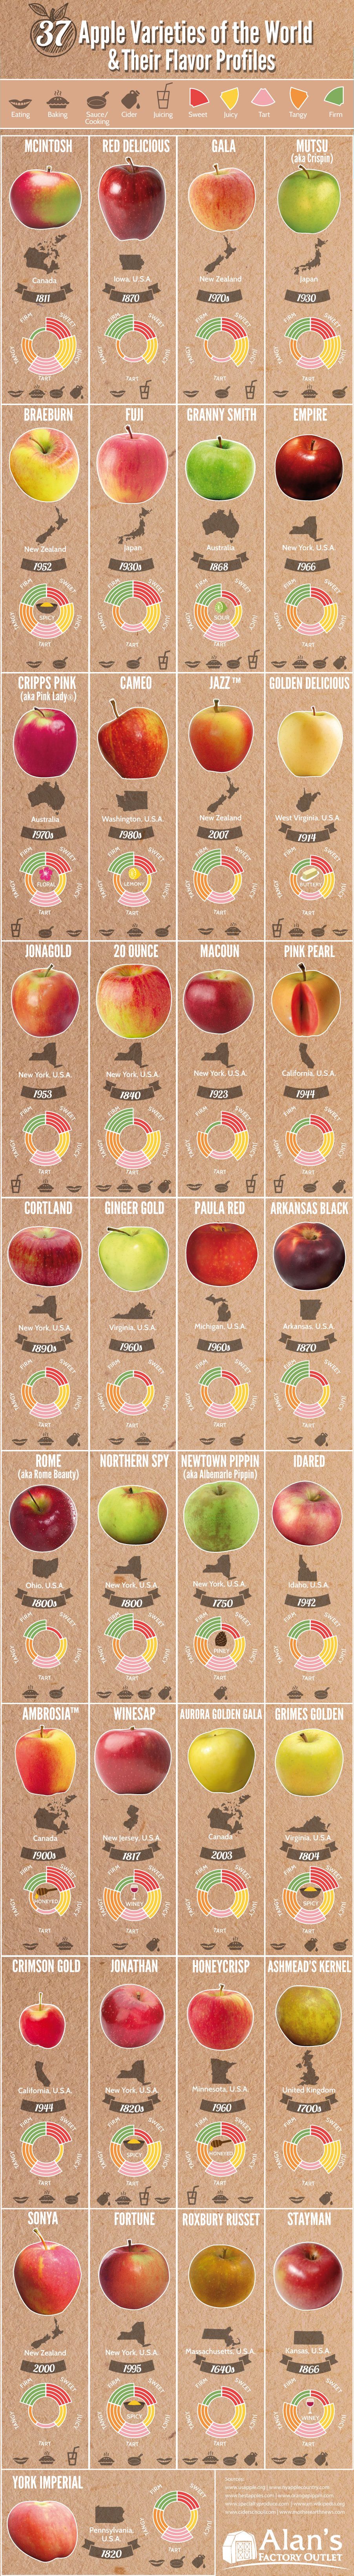 37 Apple Varieties of the World & Their Flavor Profiles